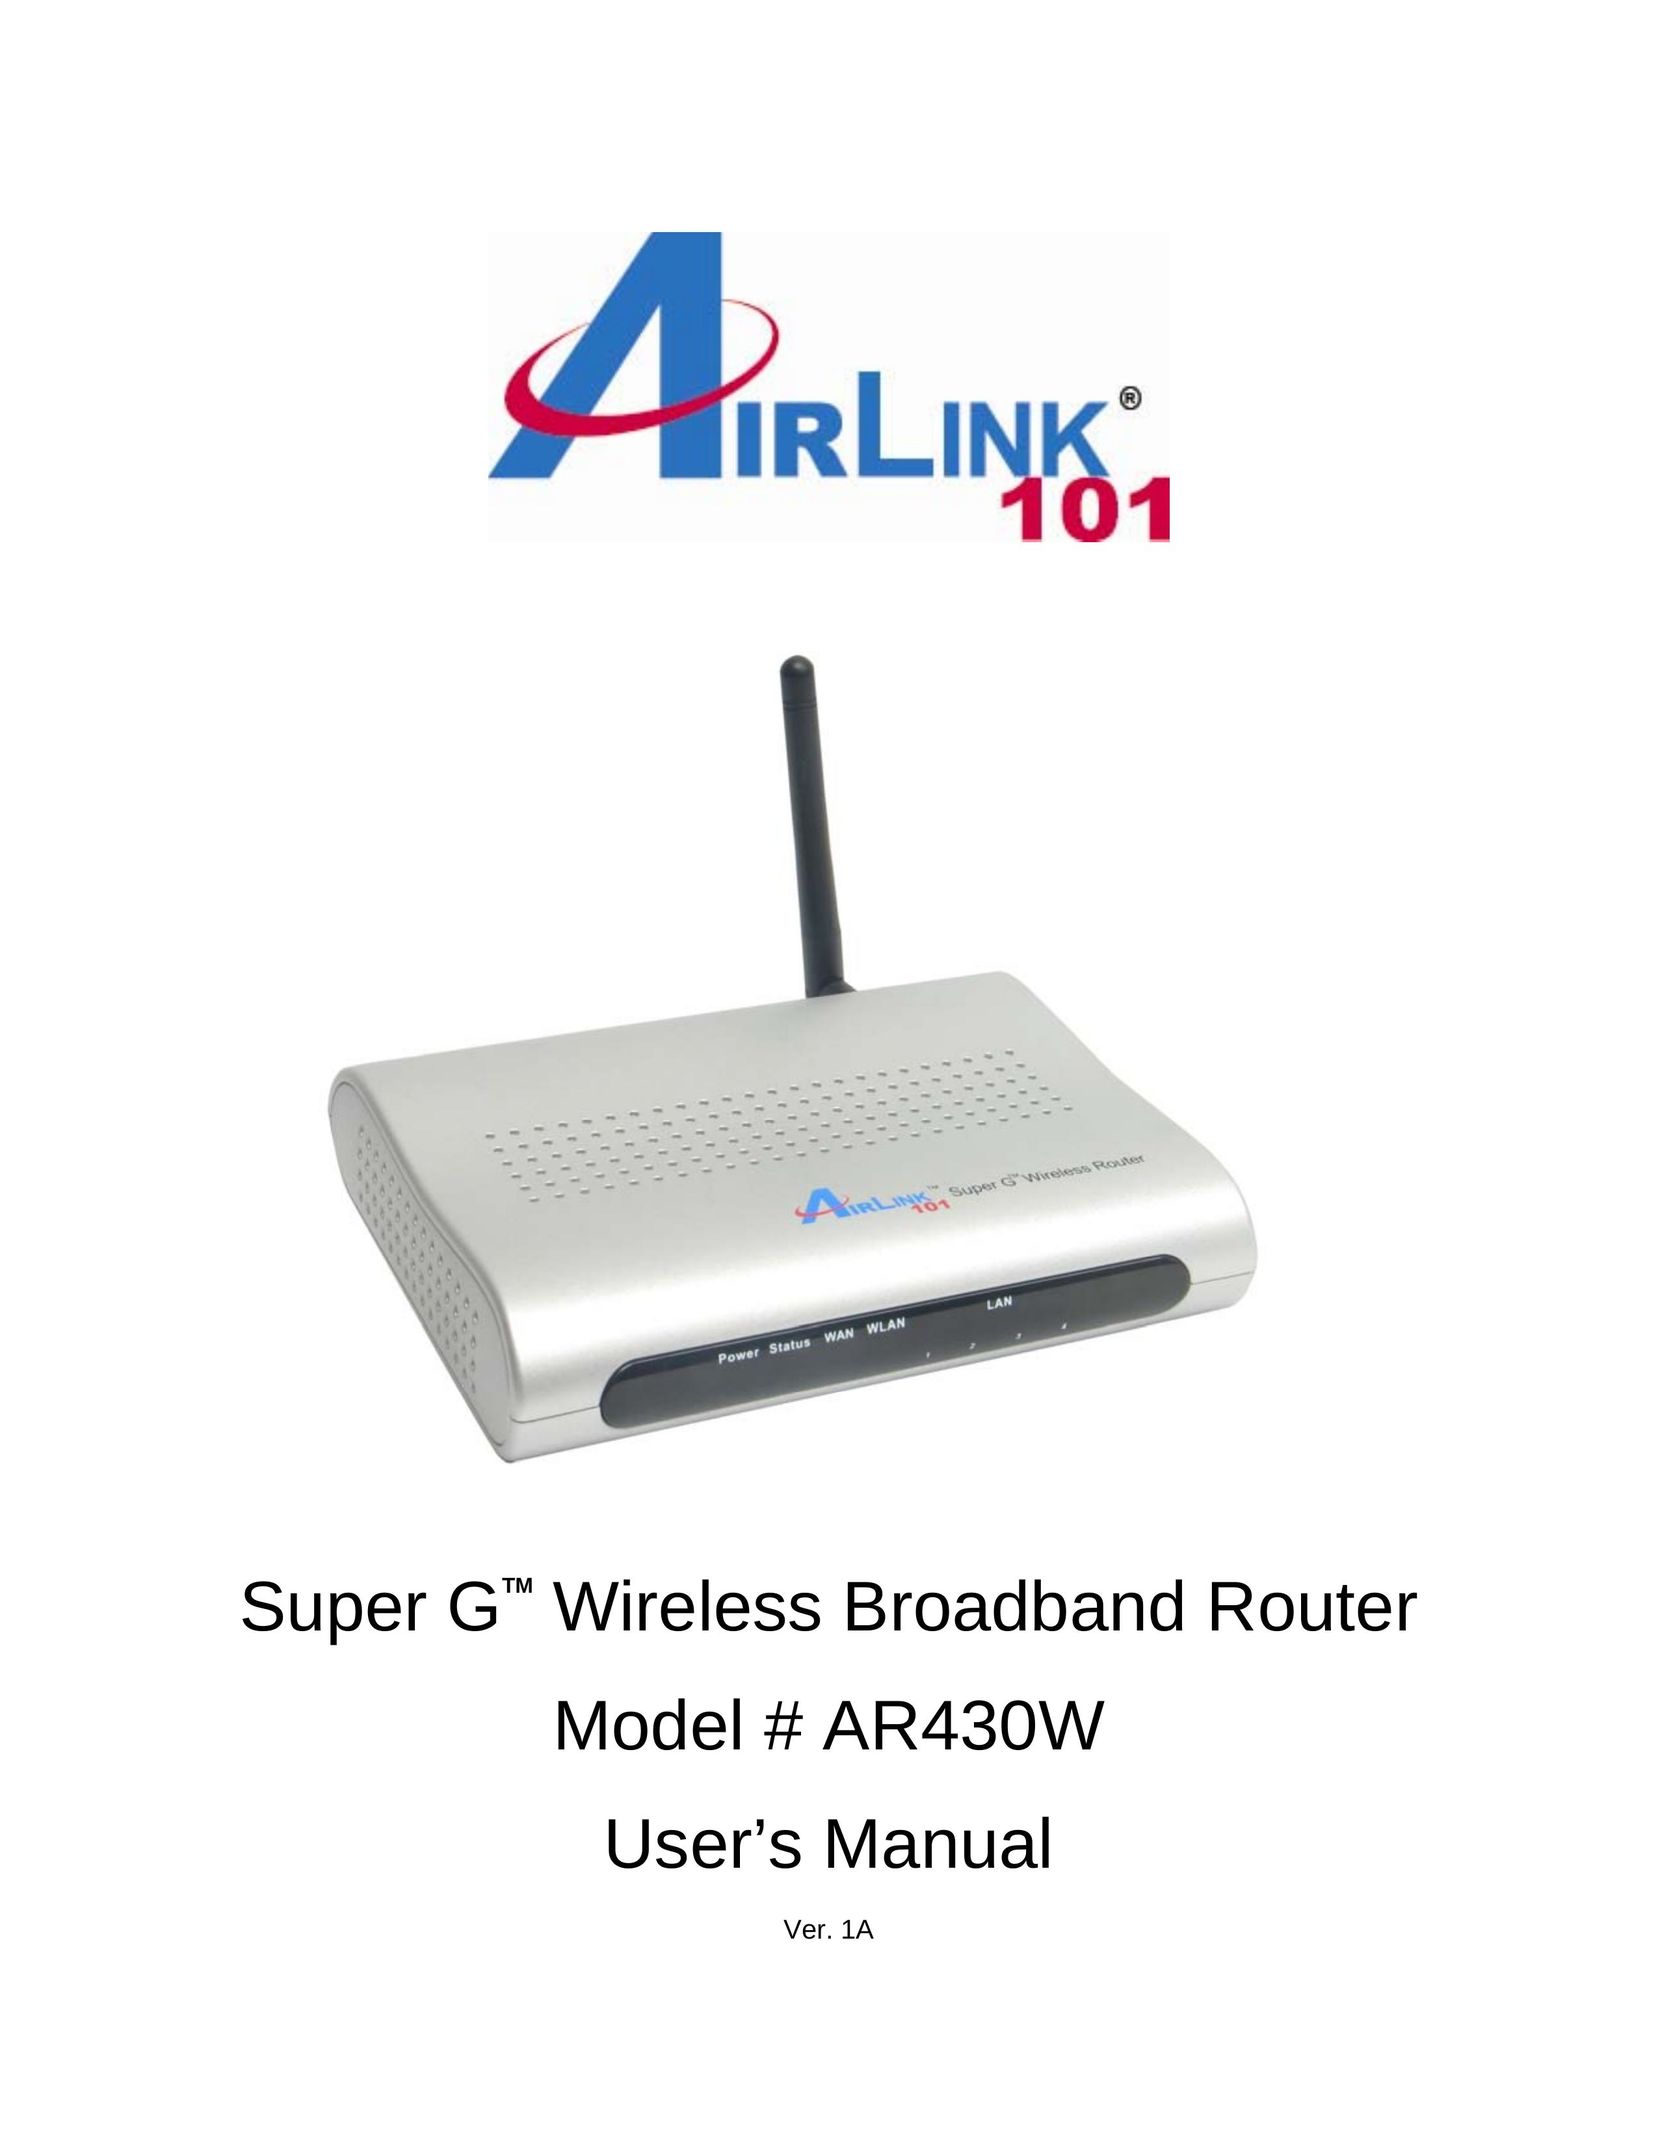 Airlink101 AR430W Network Router User Manual